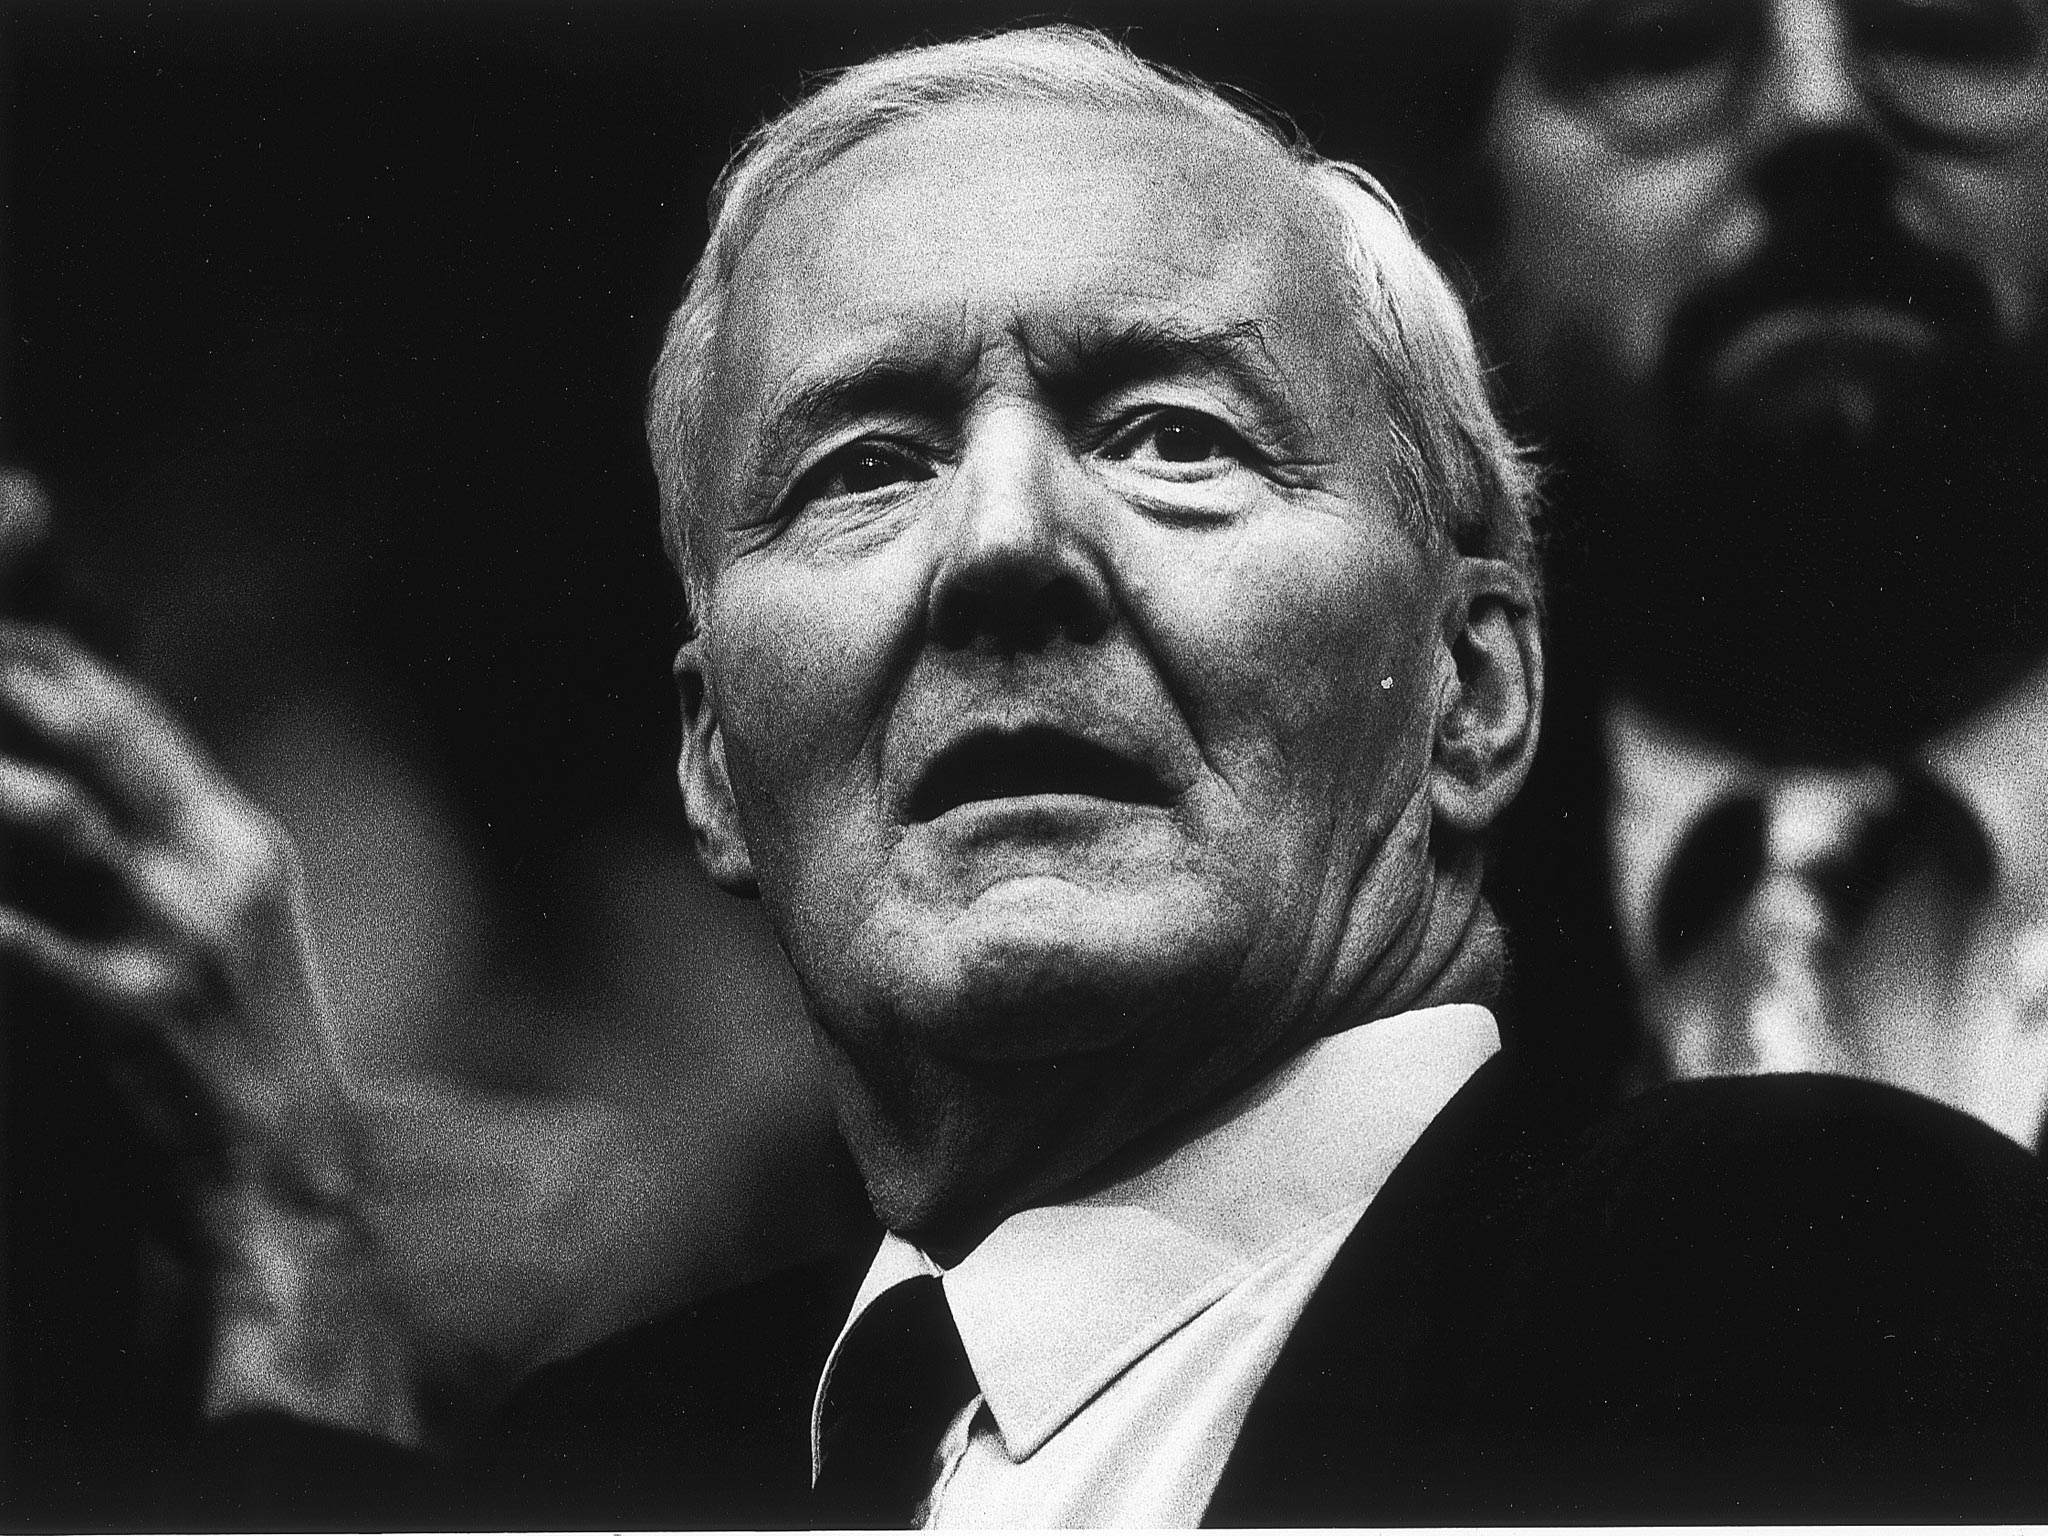 The veteran Labour politician and campaigner for socialism Tony Benn